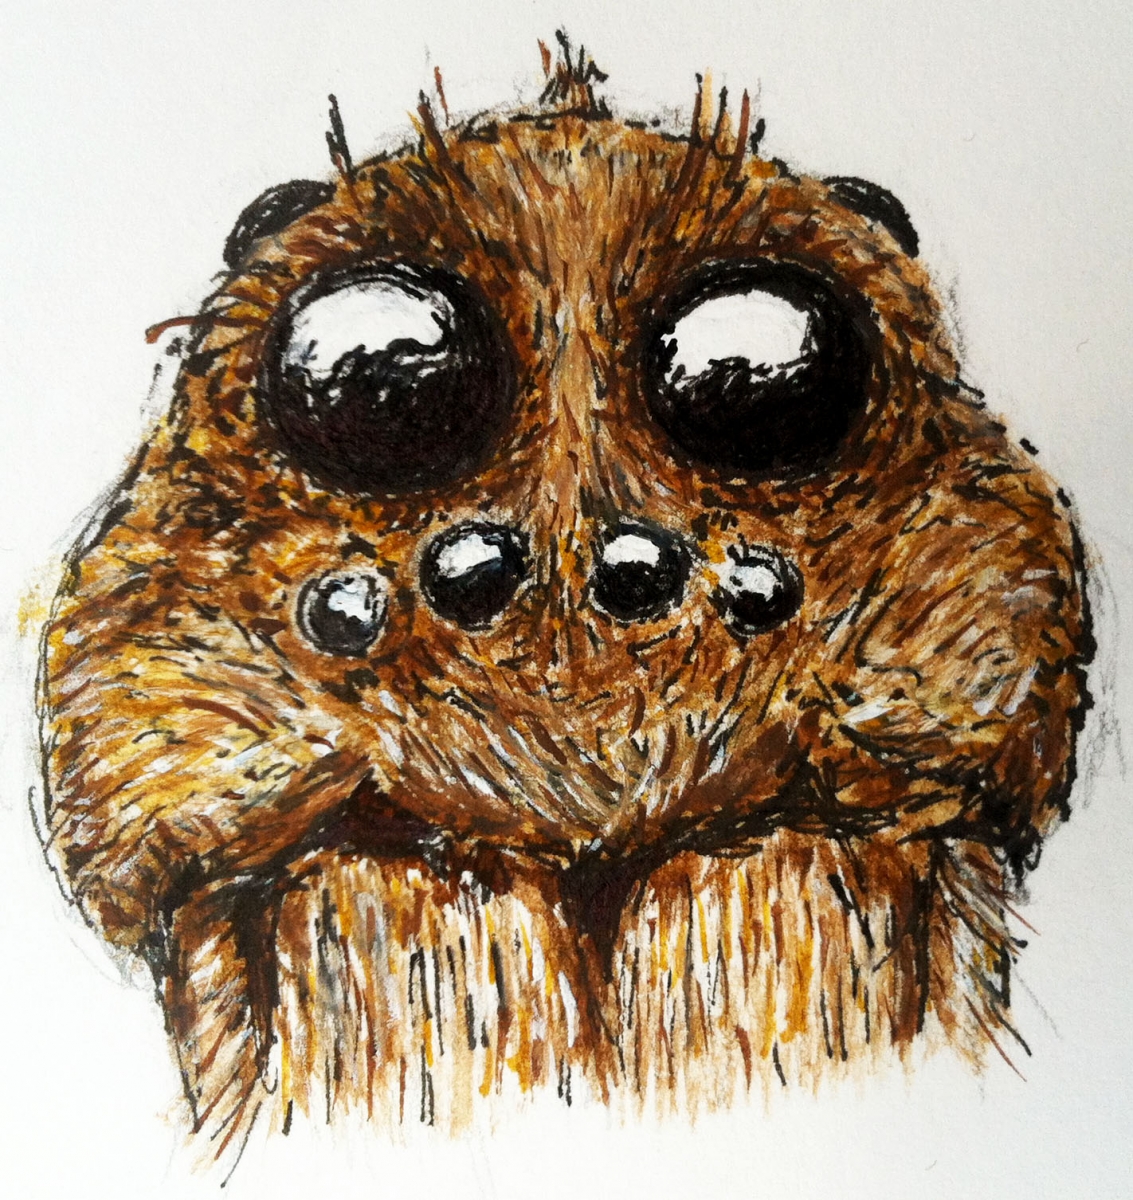 [A drawing in ink of the face of a wolf spider; drawing by Heather Clendenin.]